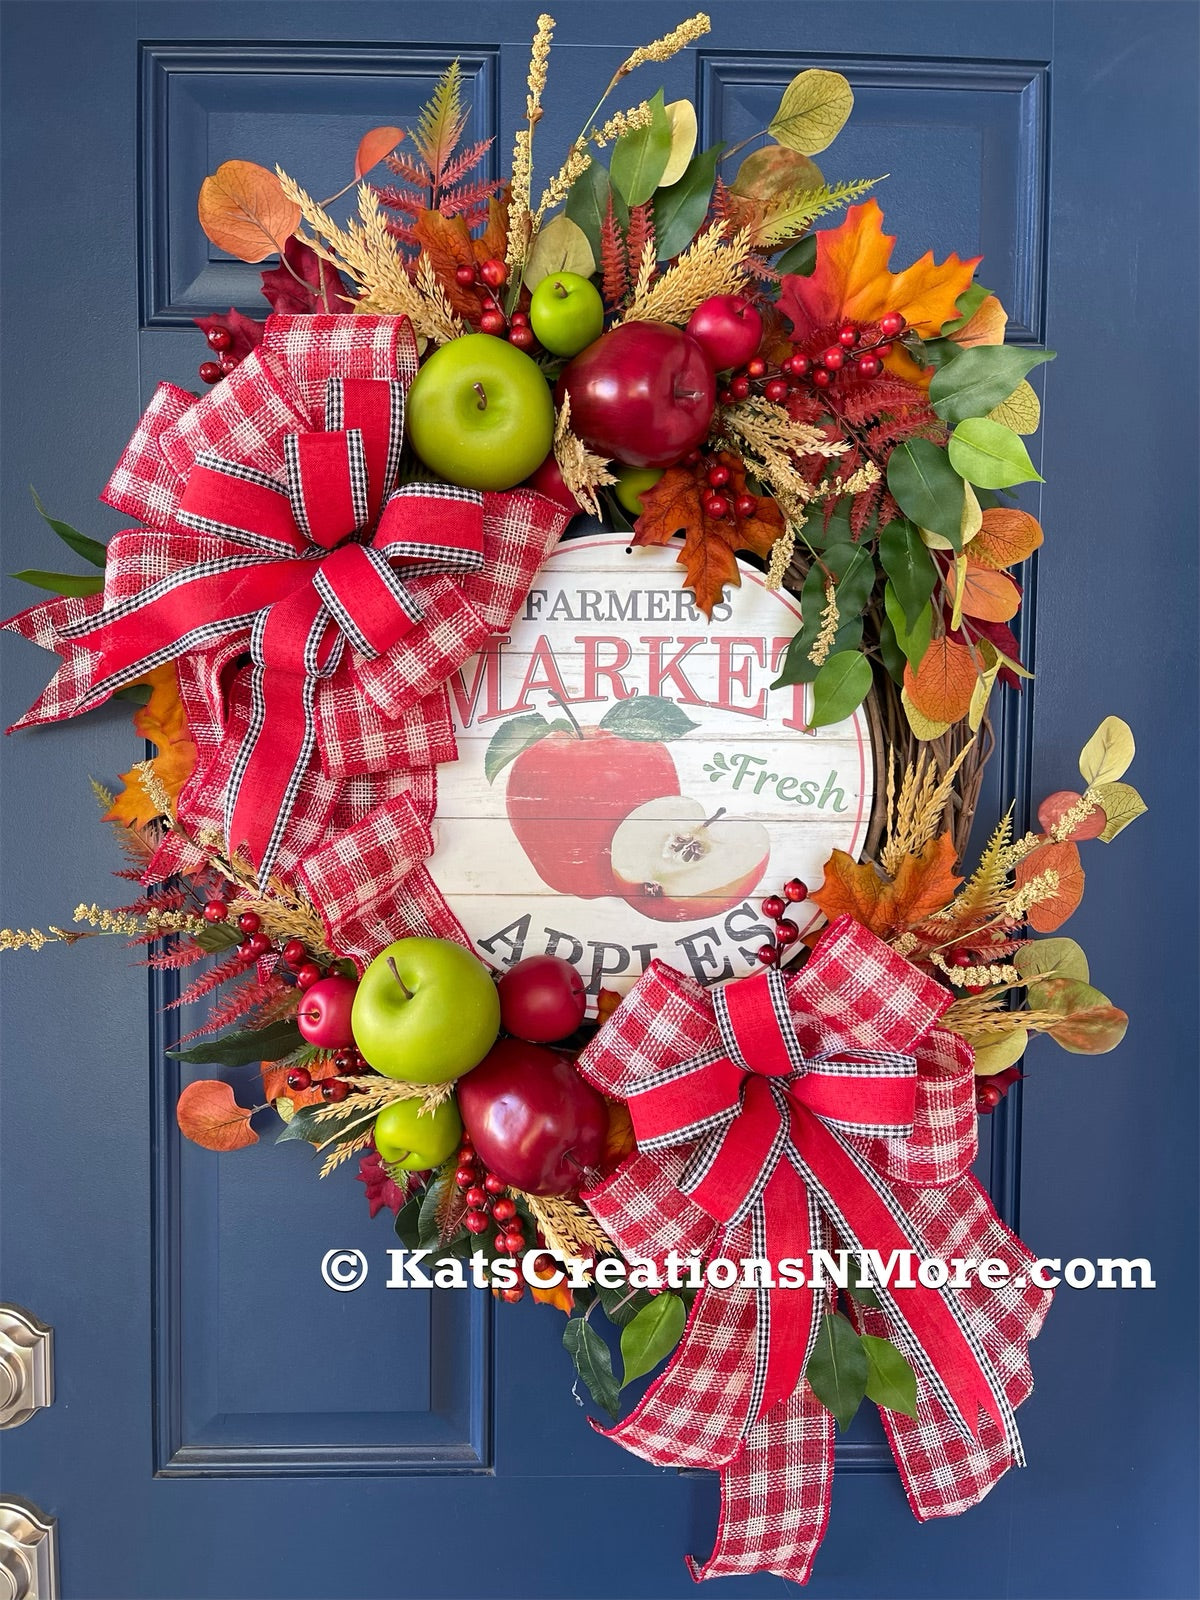 Fall Apple Grapevine Wreath filled with Red and Green Apples, Fall Leaves and Berries, Double Bows of Red, White and Black with a Farmers Market Fresh Apples Sign in the Center. 